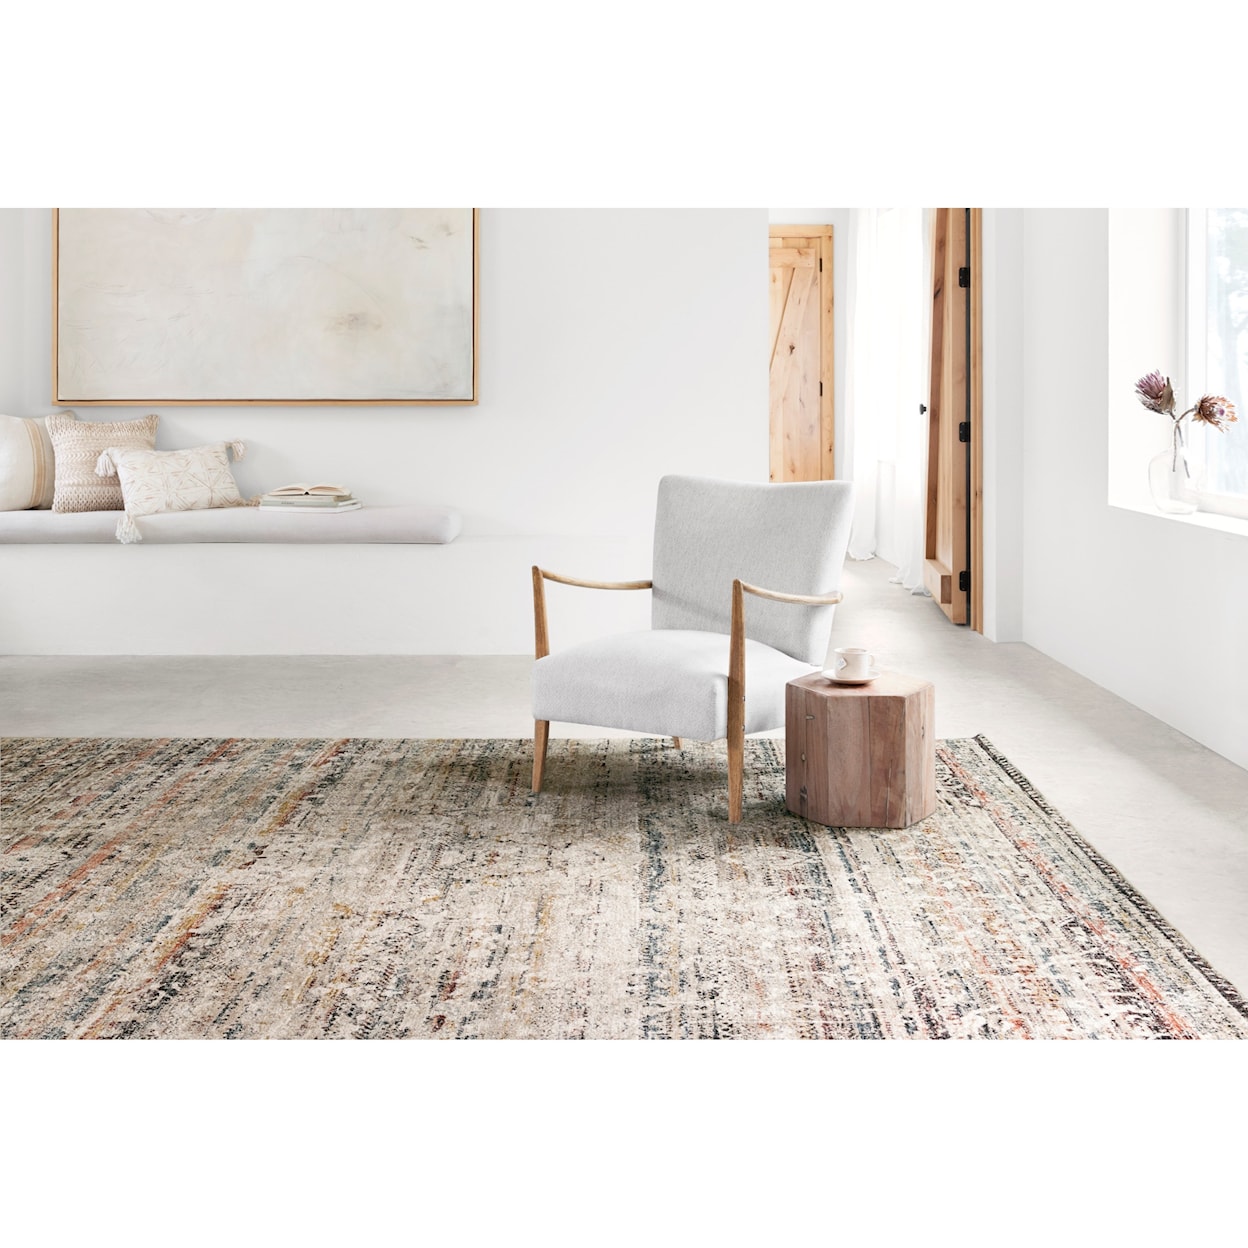 Reeds Rugs Theia 2'10" x 10' Taupe / Multi Rug